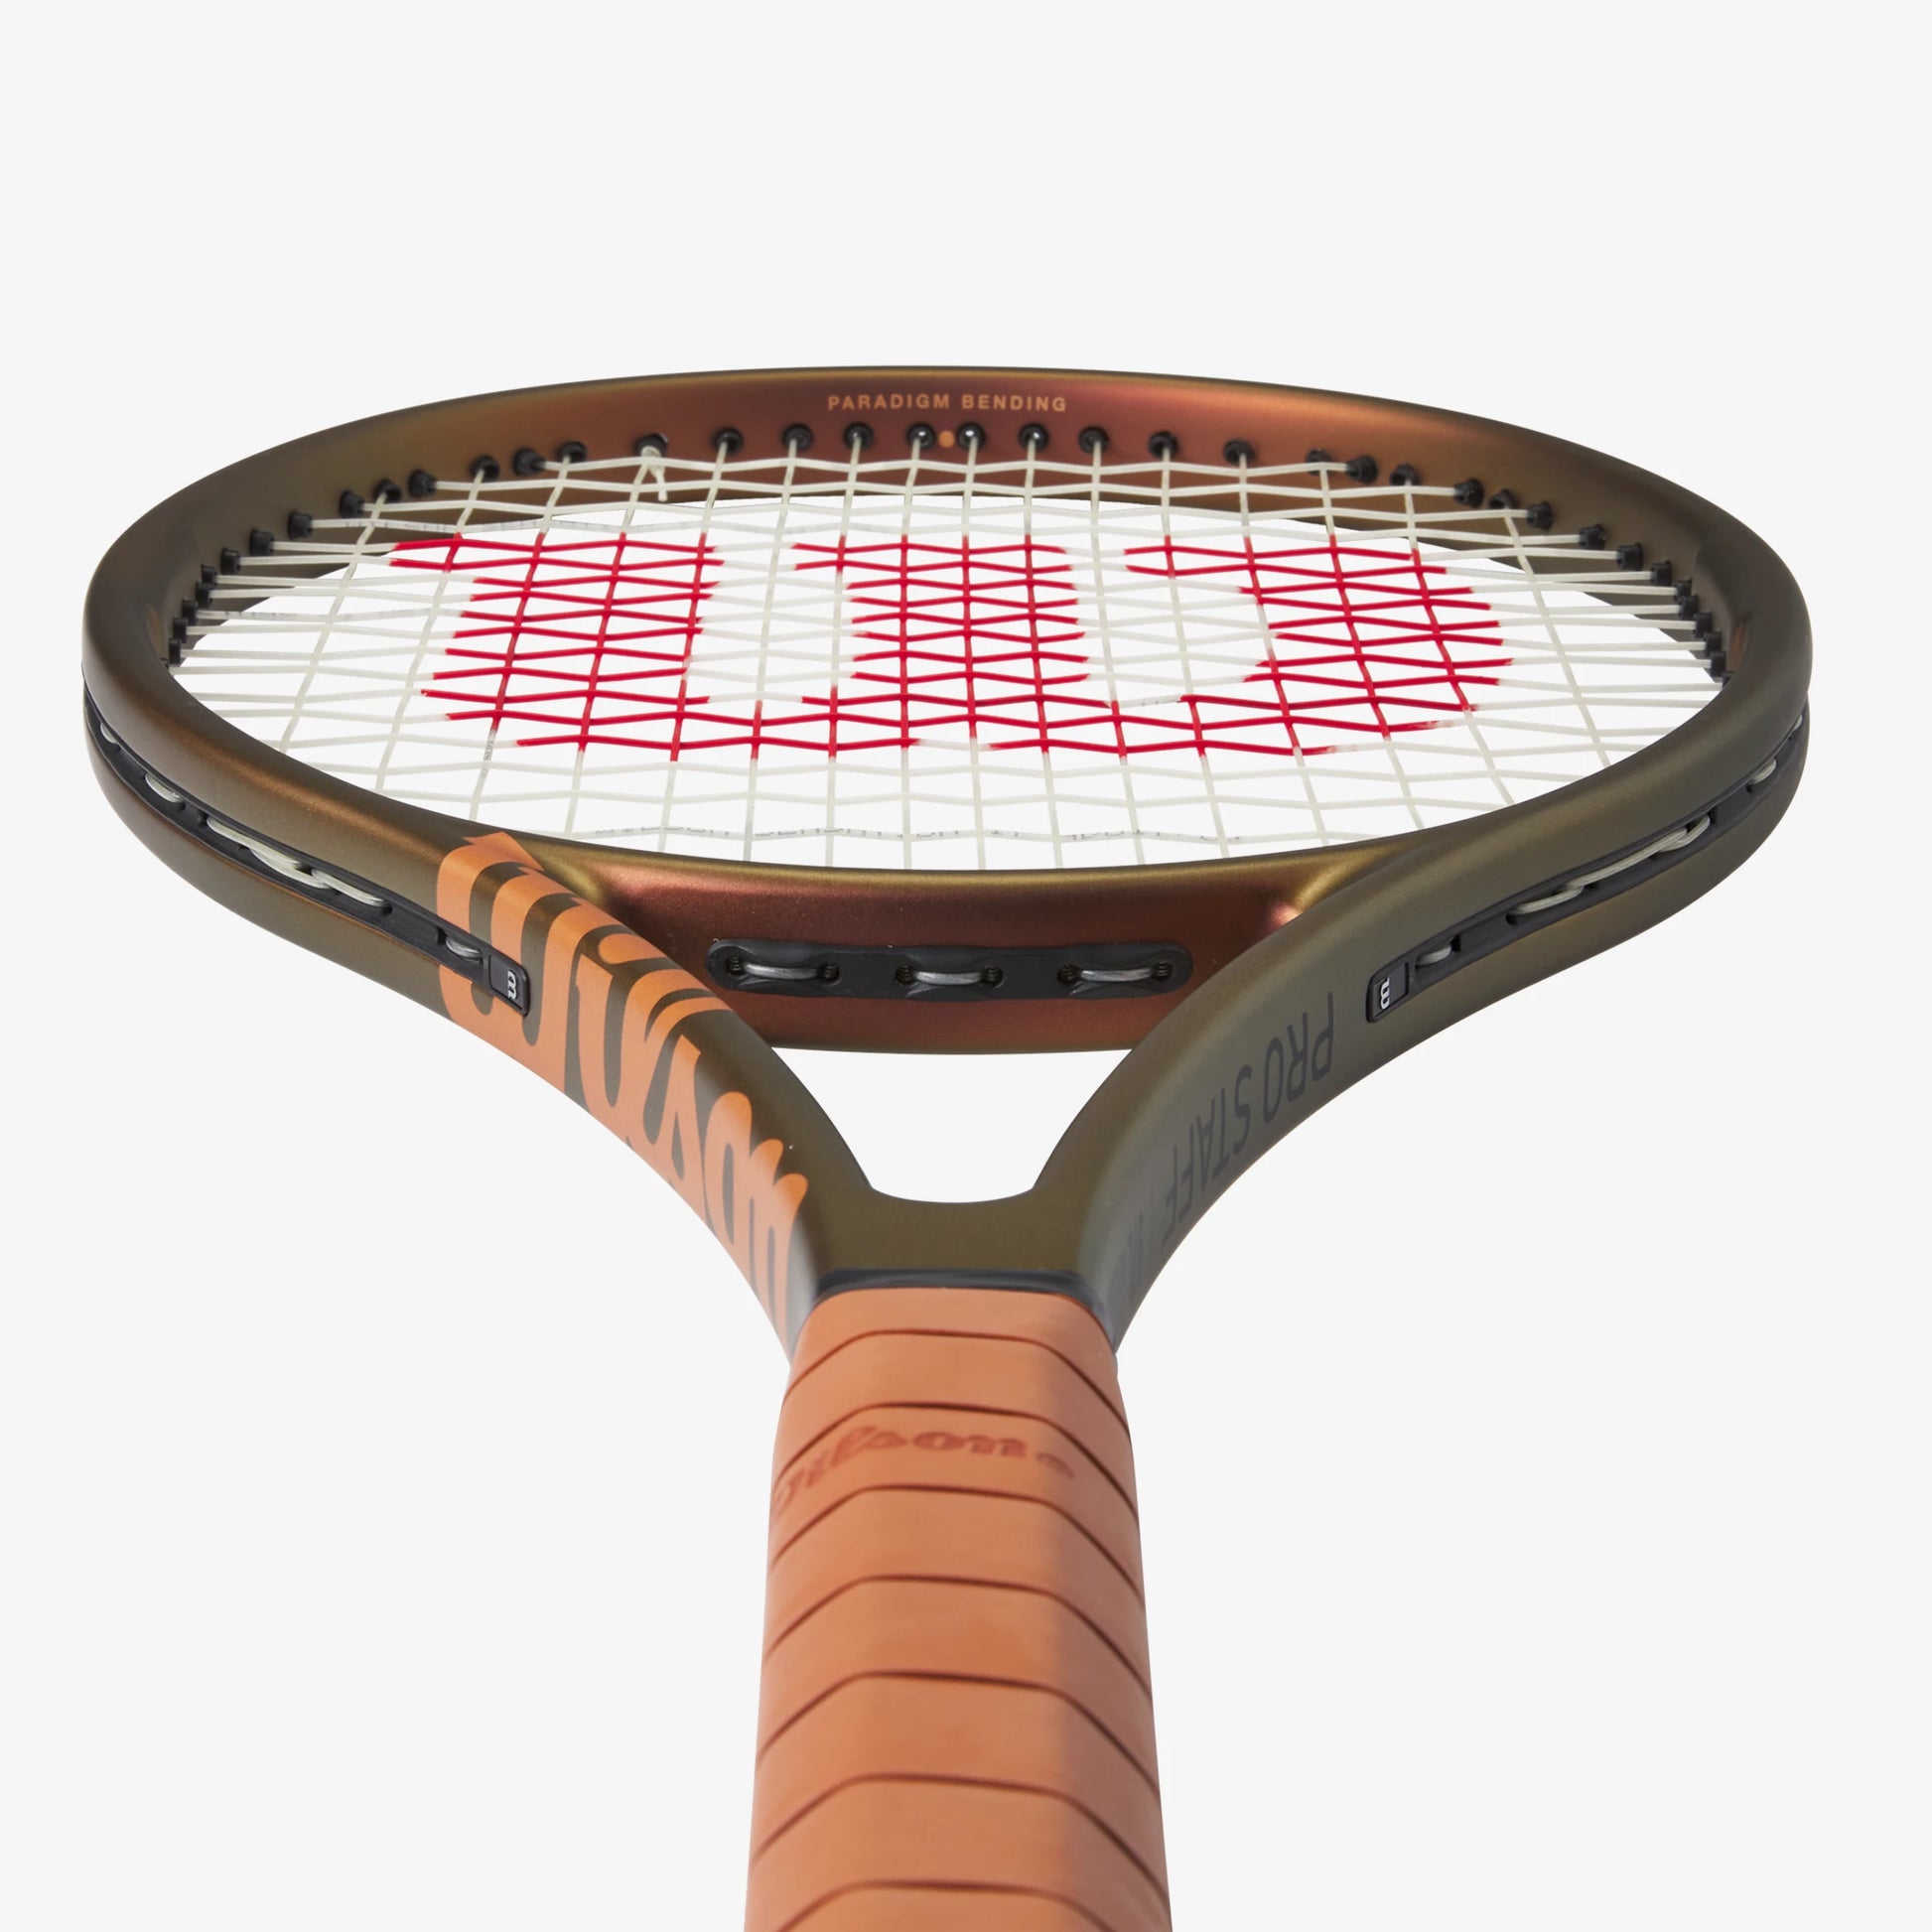 The Wilson Pro Staff 97L Version 14 Tennis Racket available for sale at GSM Sports.